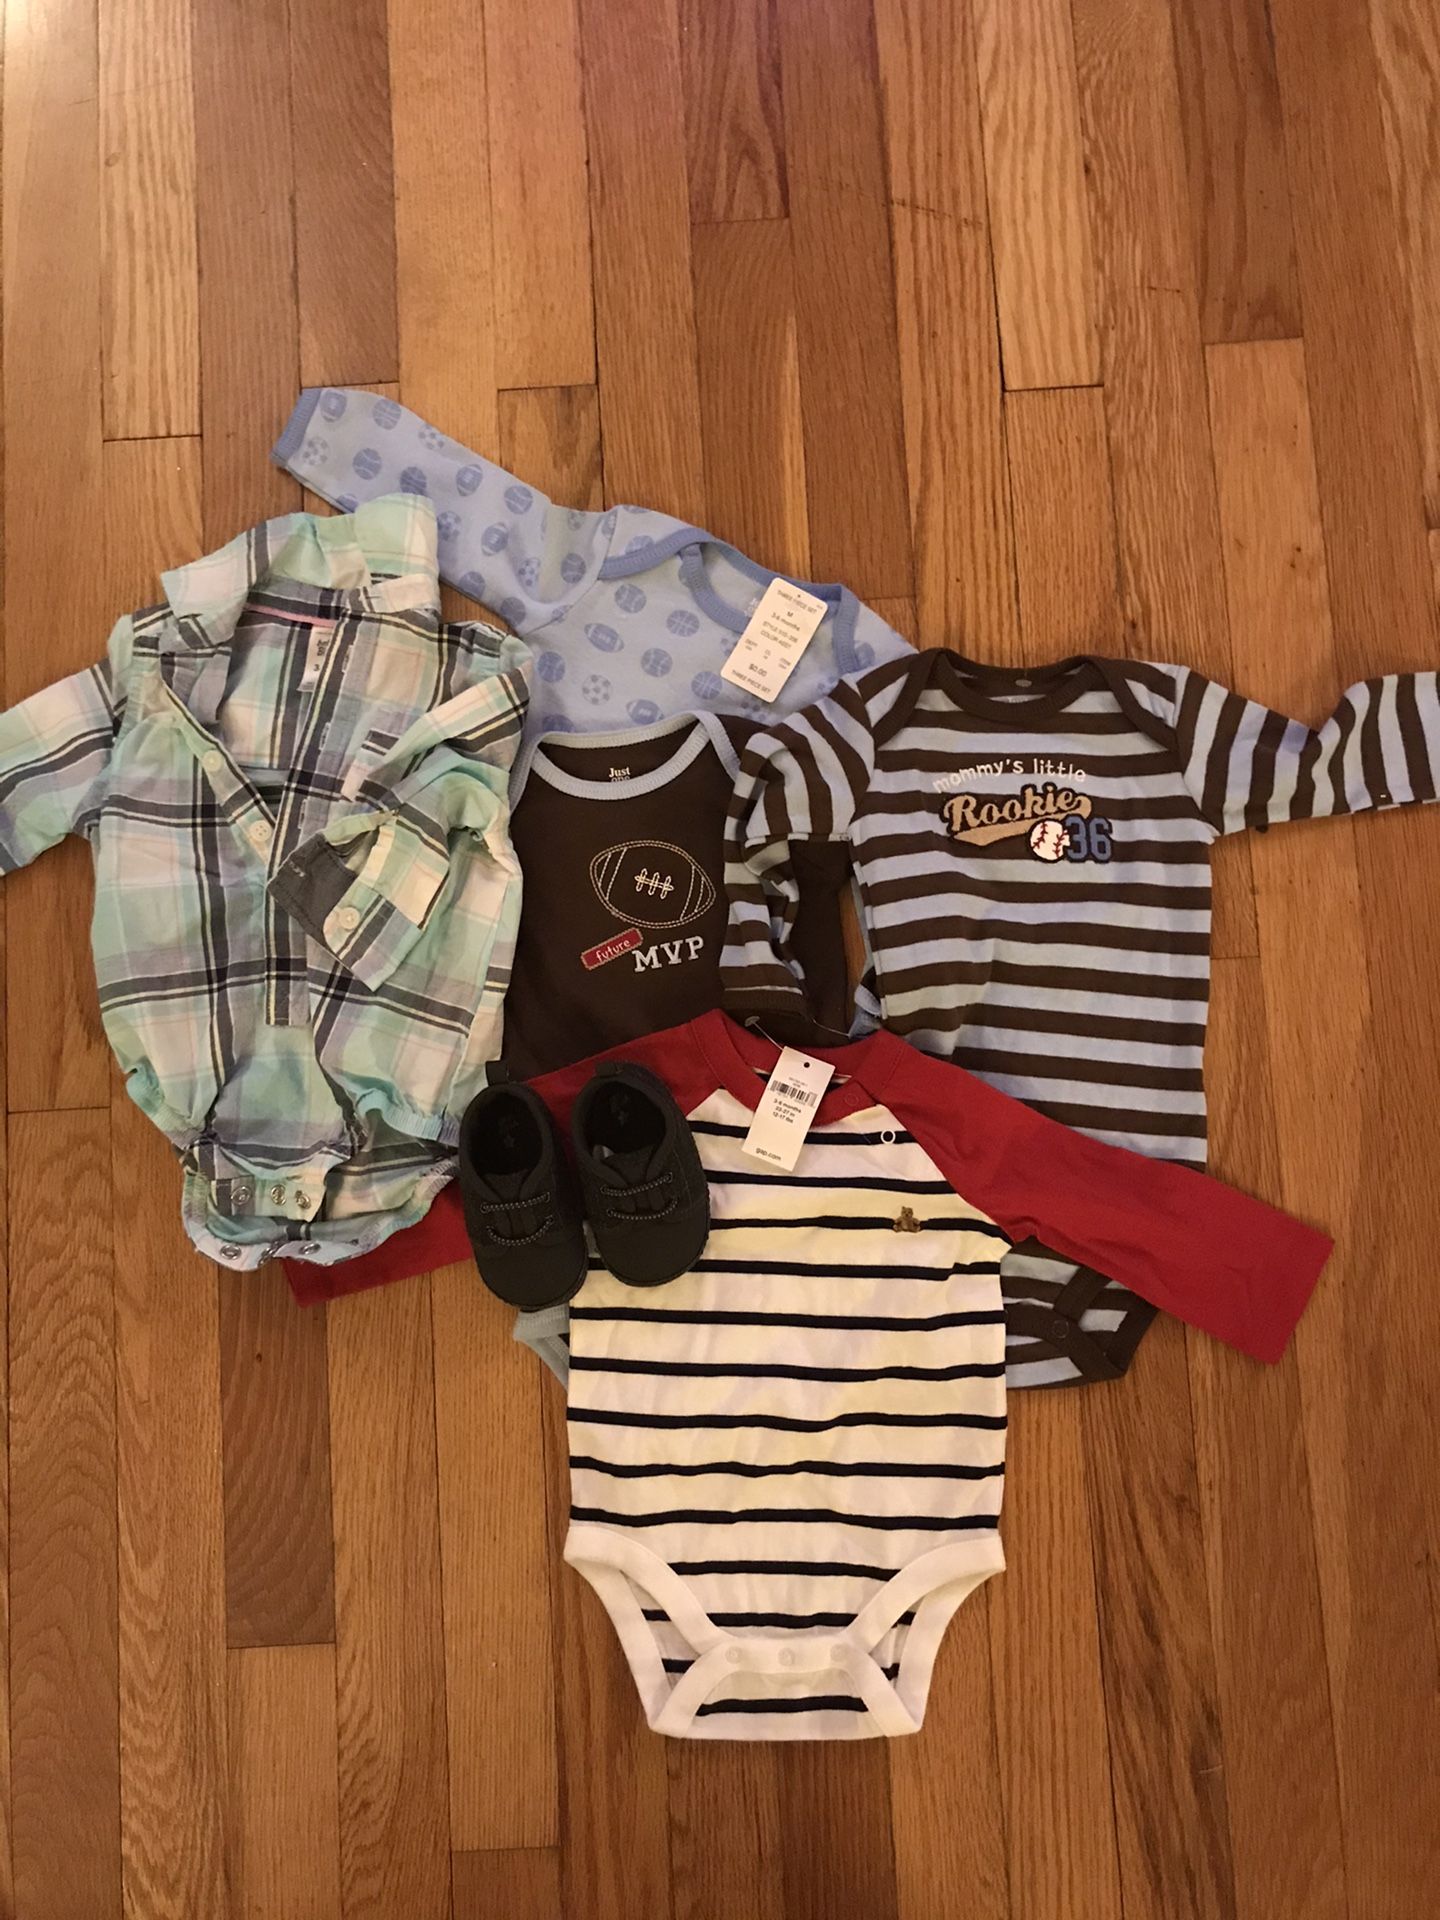 75 piece 3 month baby boy clothing bundle/clothes/shoes/swaddle